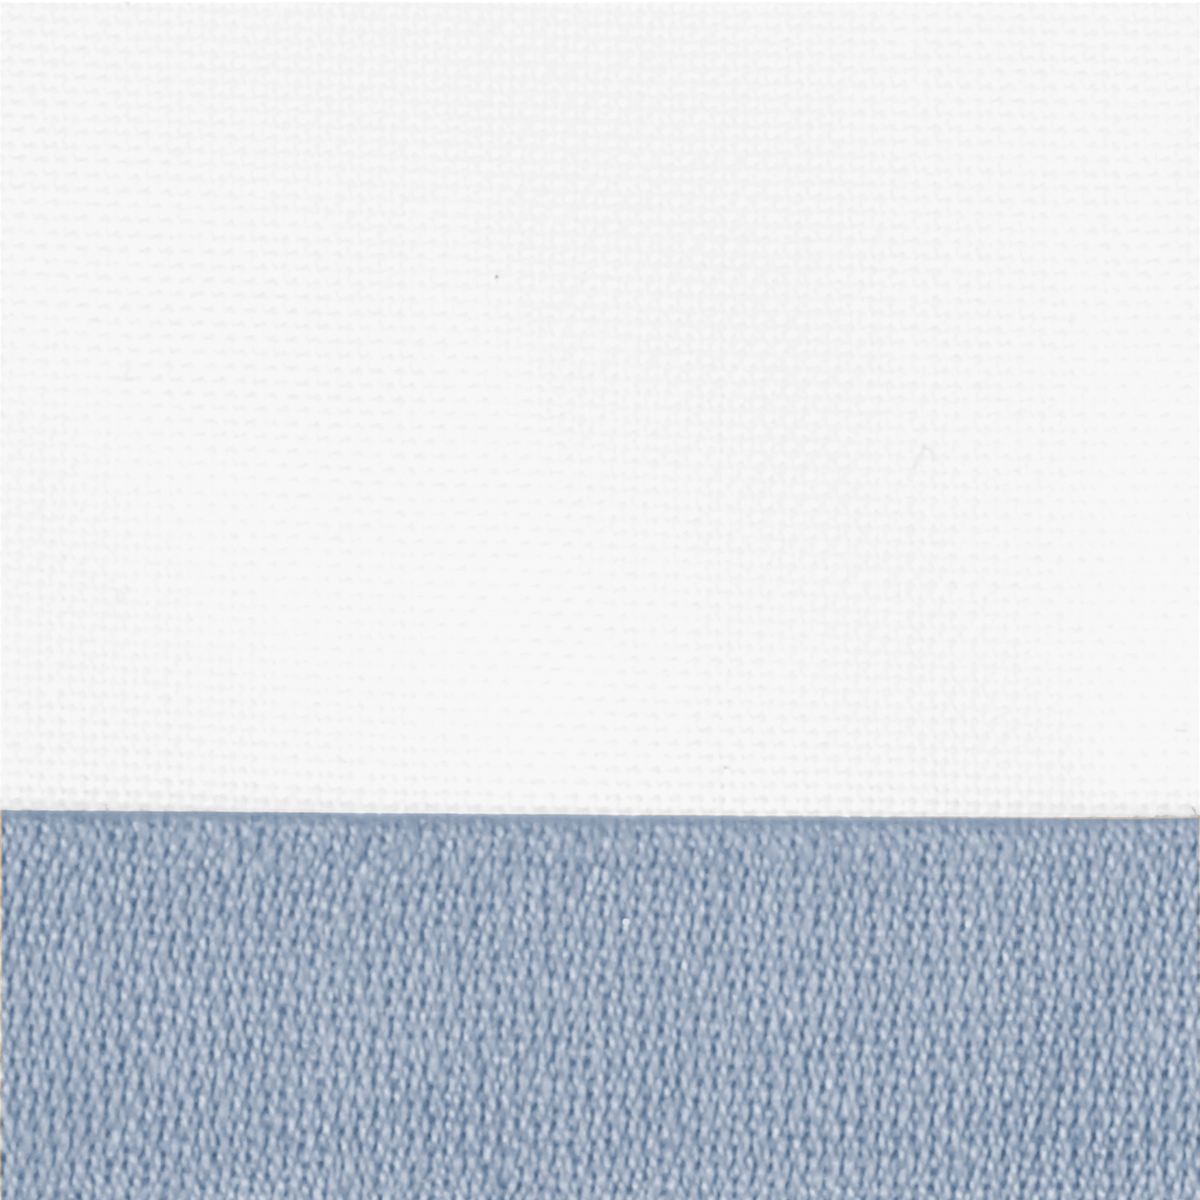 Swatch Sample of Matouk Gatsby Bedding Collection Hazy Blue Color